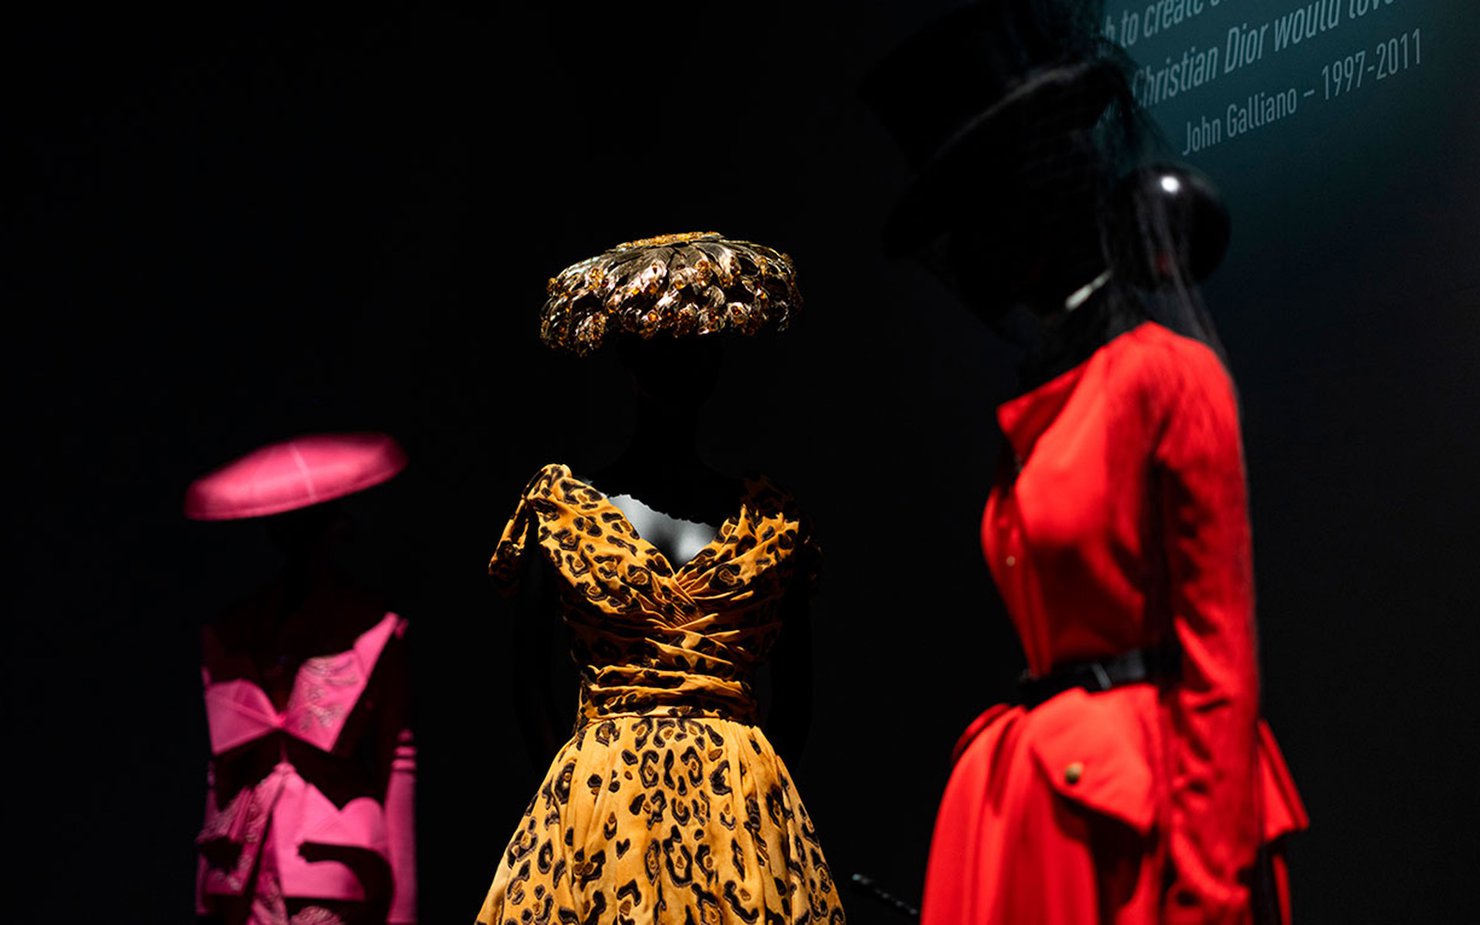 Three vibrant looks by John Galliano for Dior, featuring a leopard-print dress in the centre